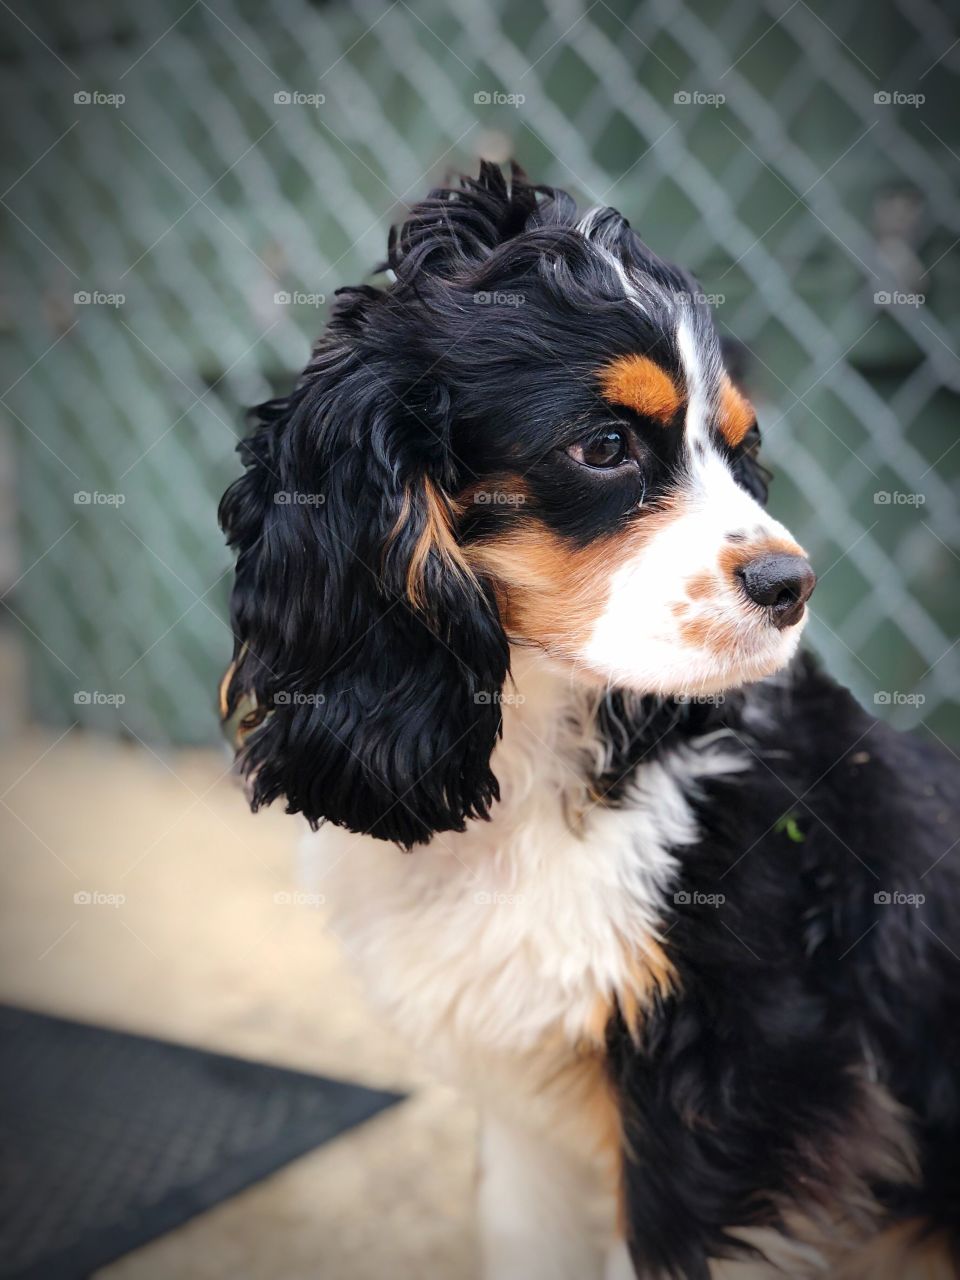 Cavalier King Charles spaniel with bed head!